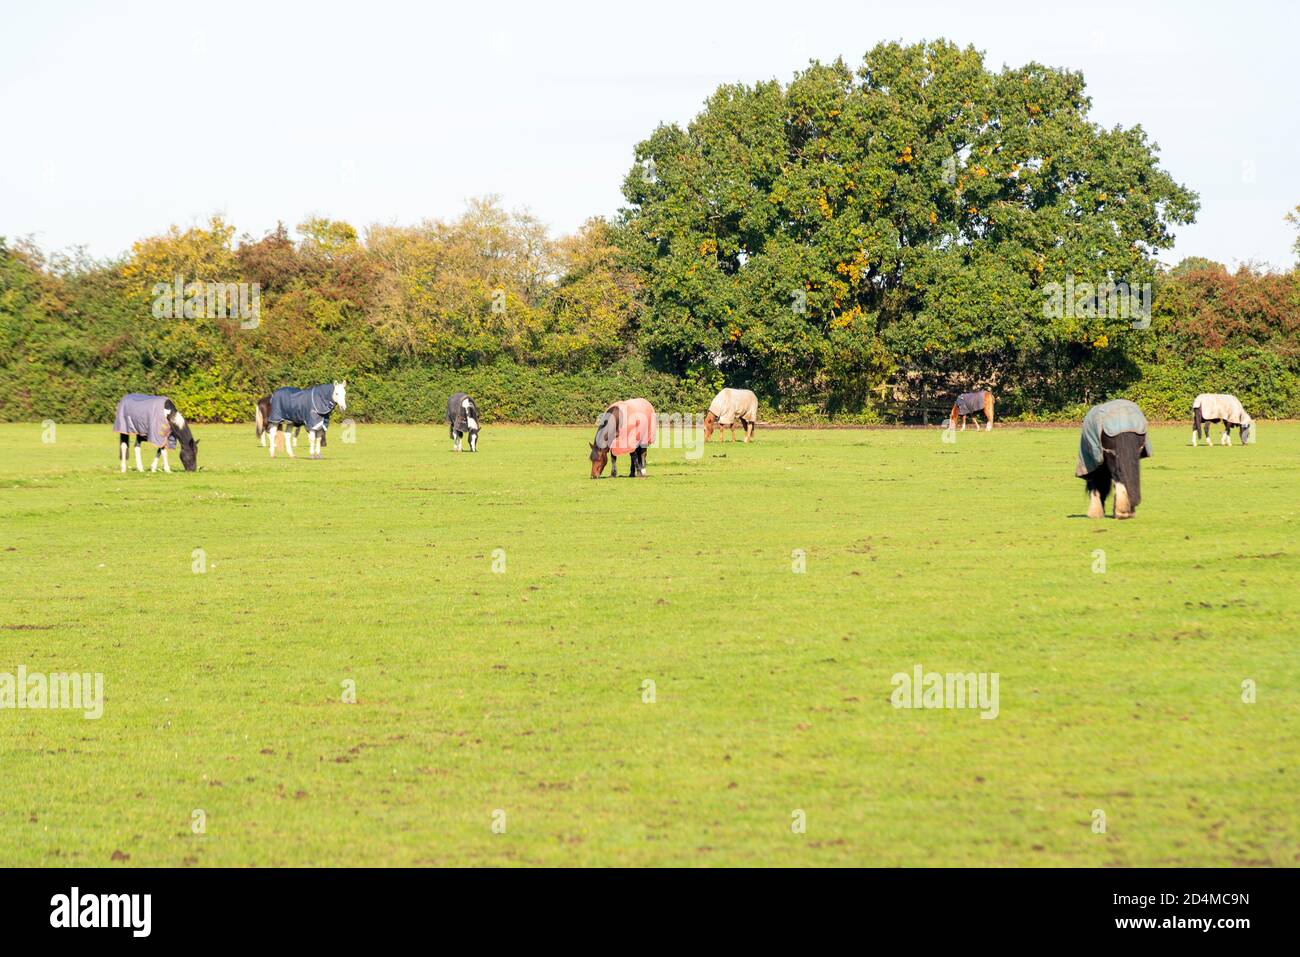 Horses in a green field in Autumn, wearing coats. Paddock with trees. Hawkwell, Rochford, Essex, UK. Bright, sunny day Stock Photo